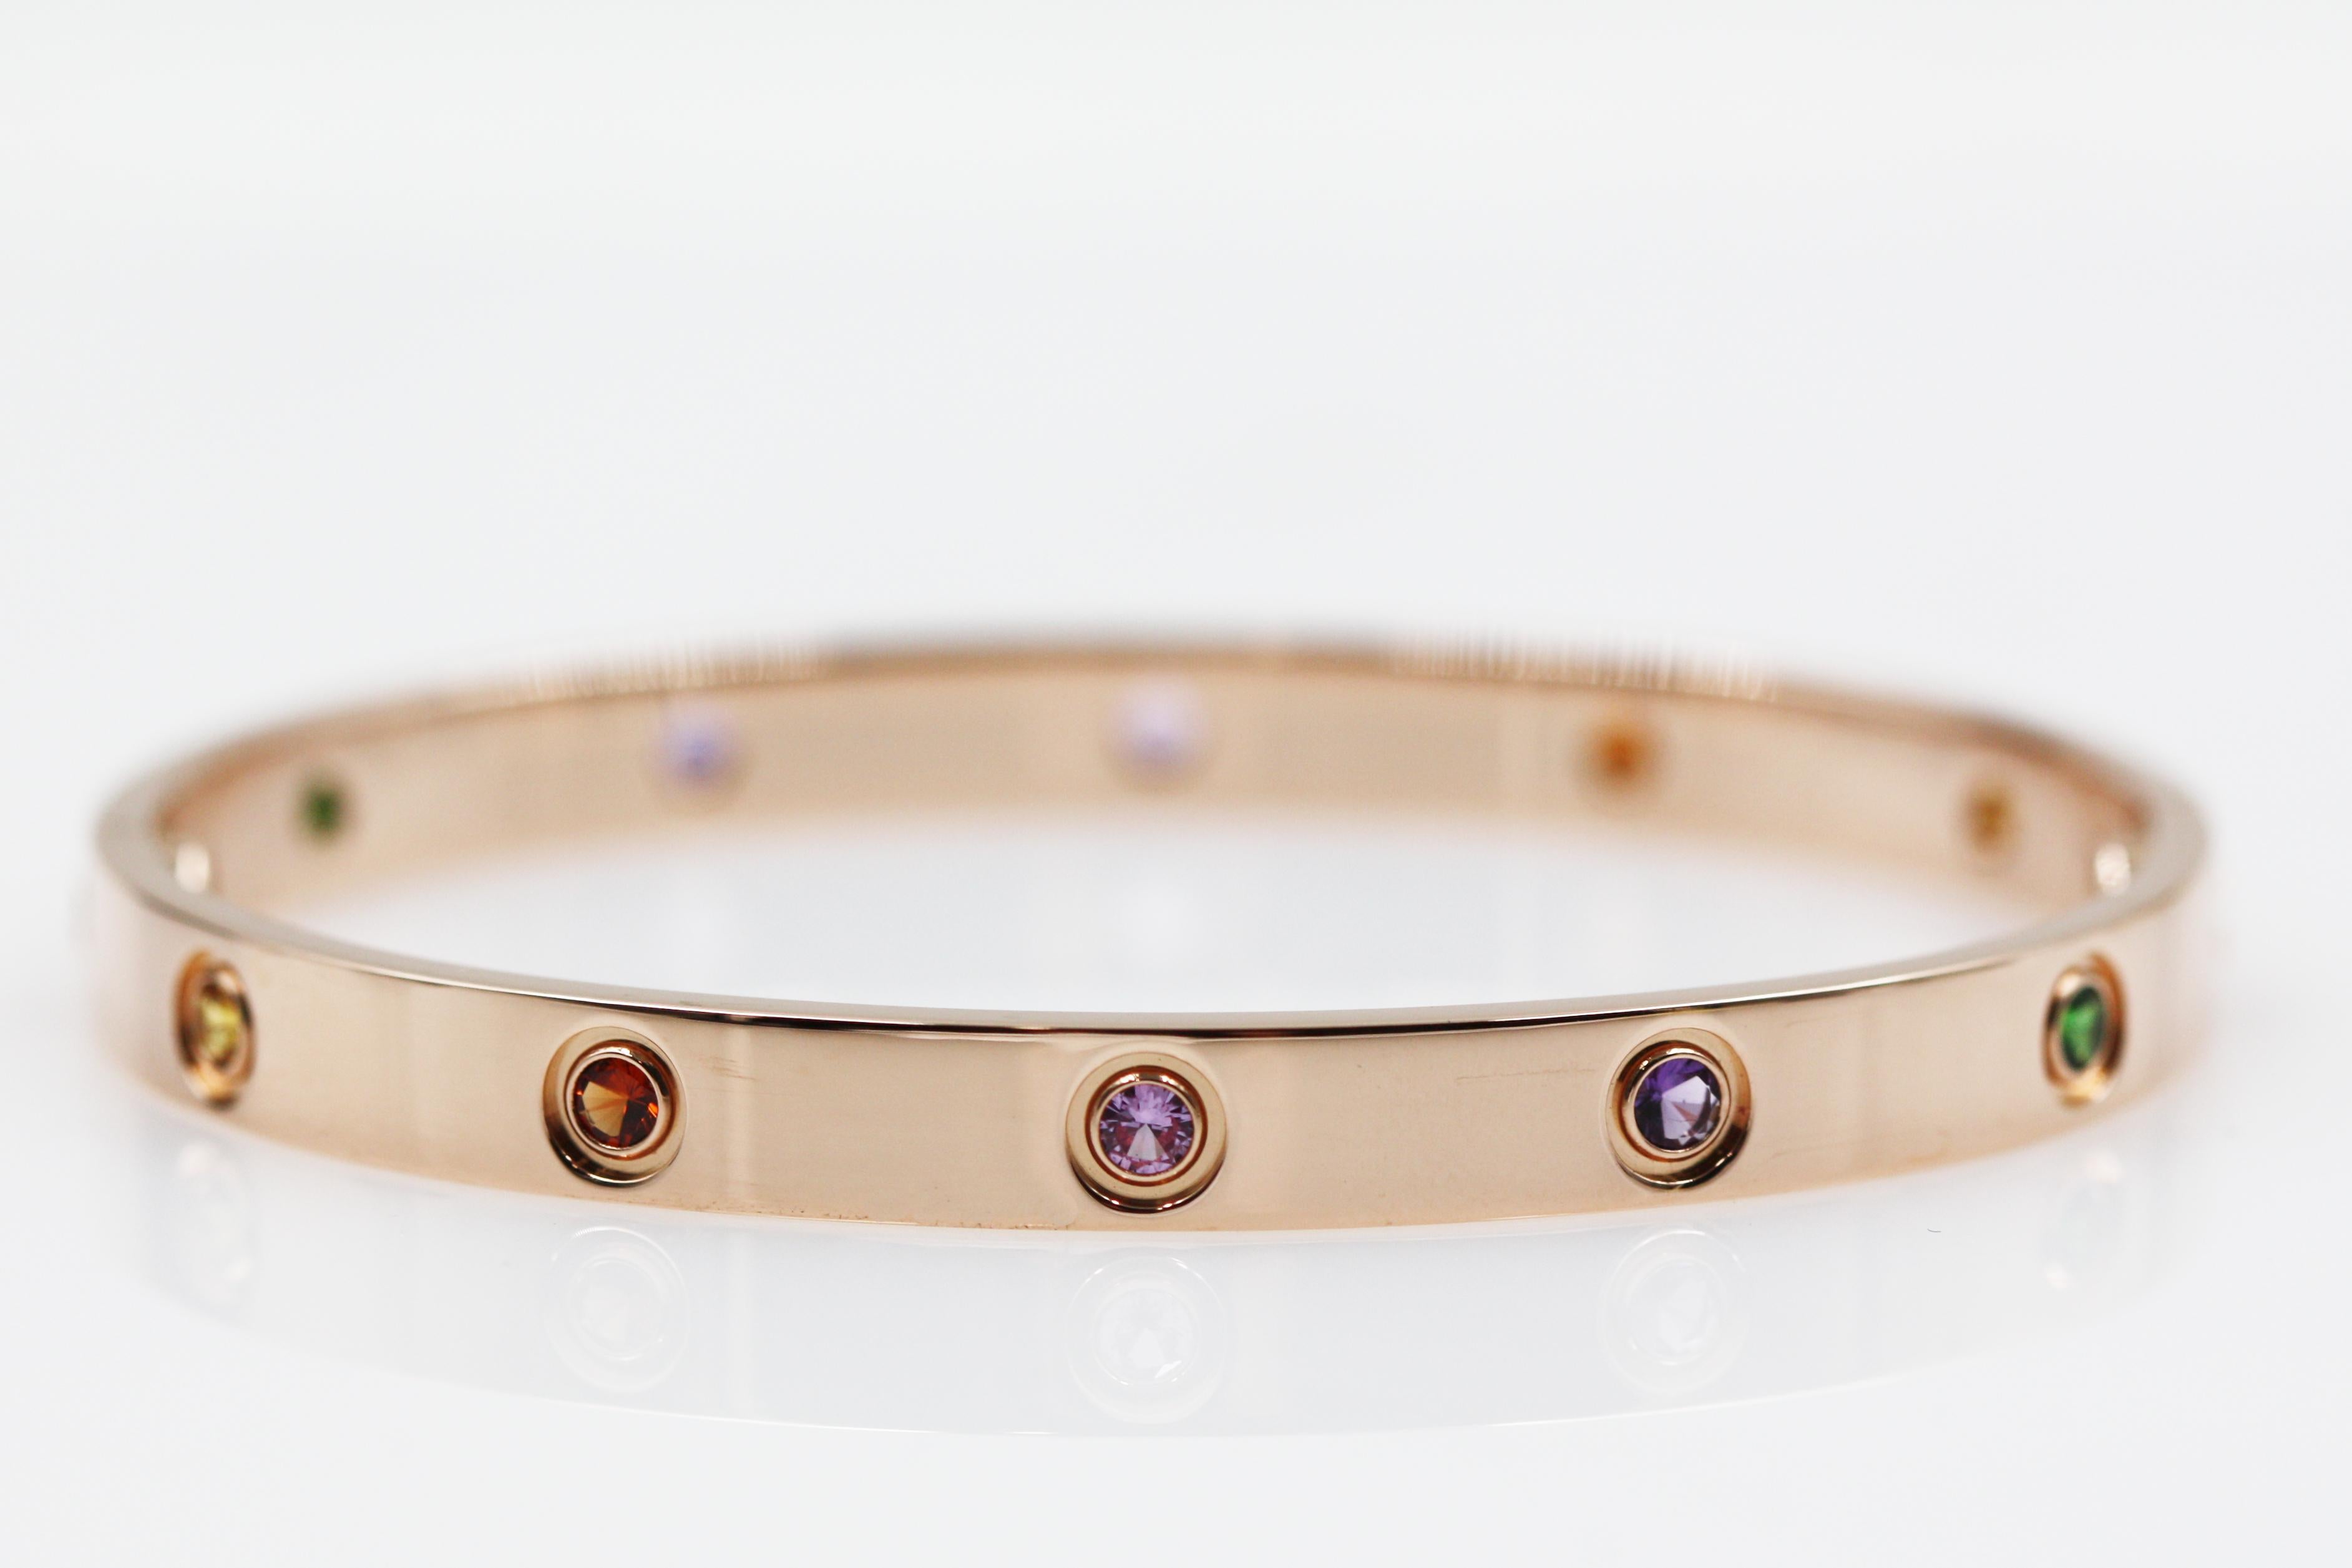 A Beautiful bracelet from Cartier Love collection, made in 18K rose gold, set with 2 pink sapphires, 2 yellow sapphires, 2 green garnets, 2 orange garnets and 2 amethysts. 

Size 18
This item will come with an original box and warranty
We have other